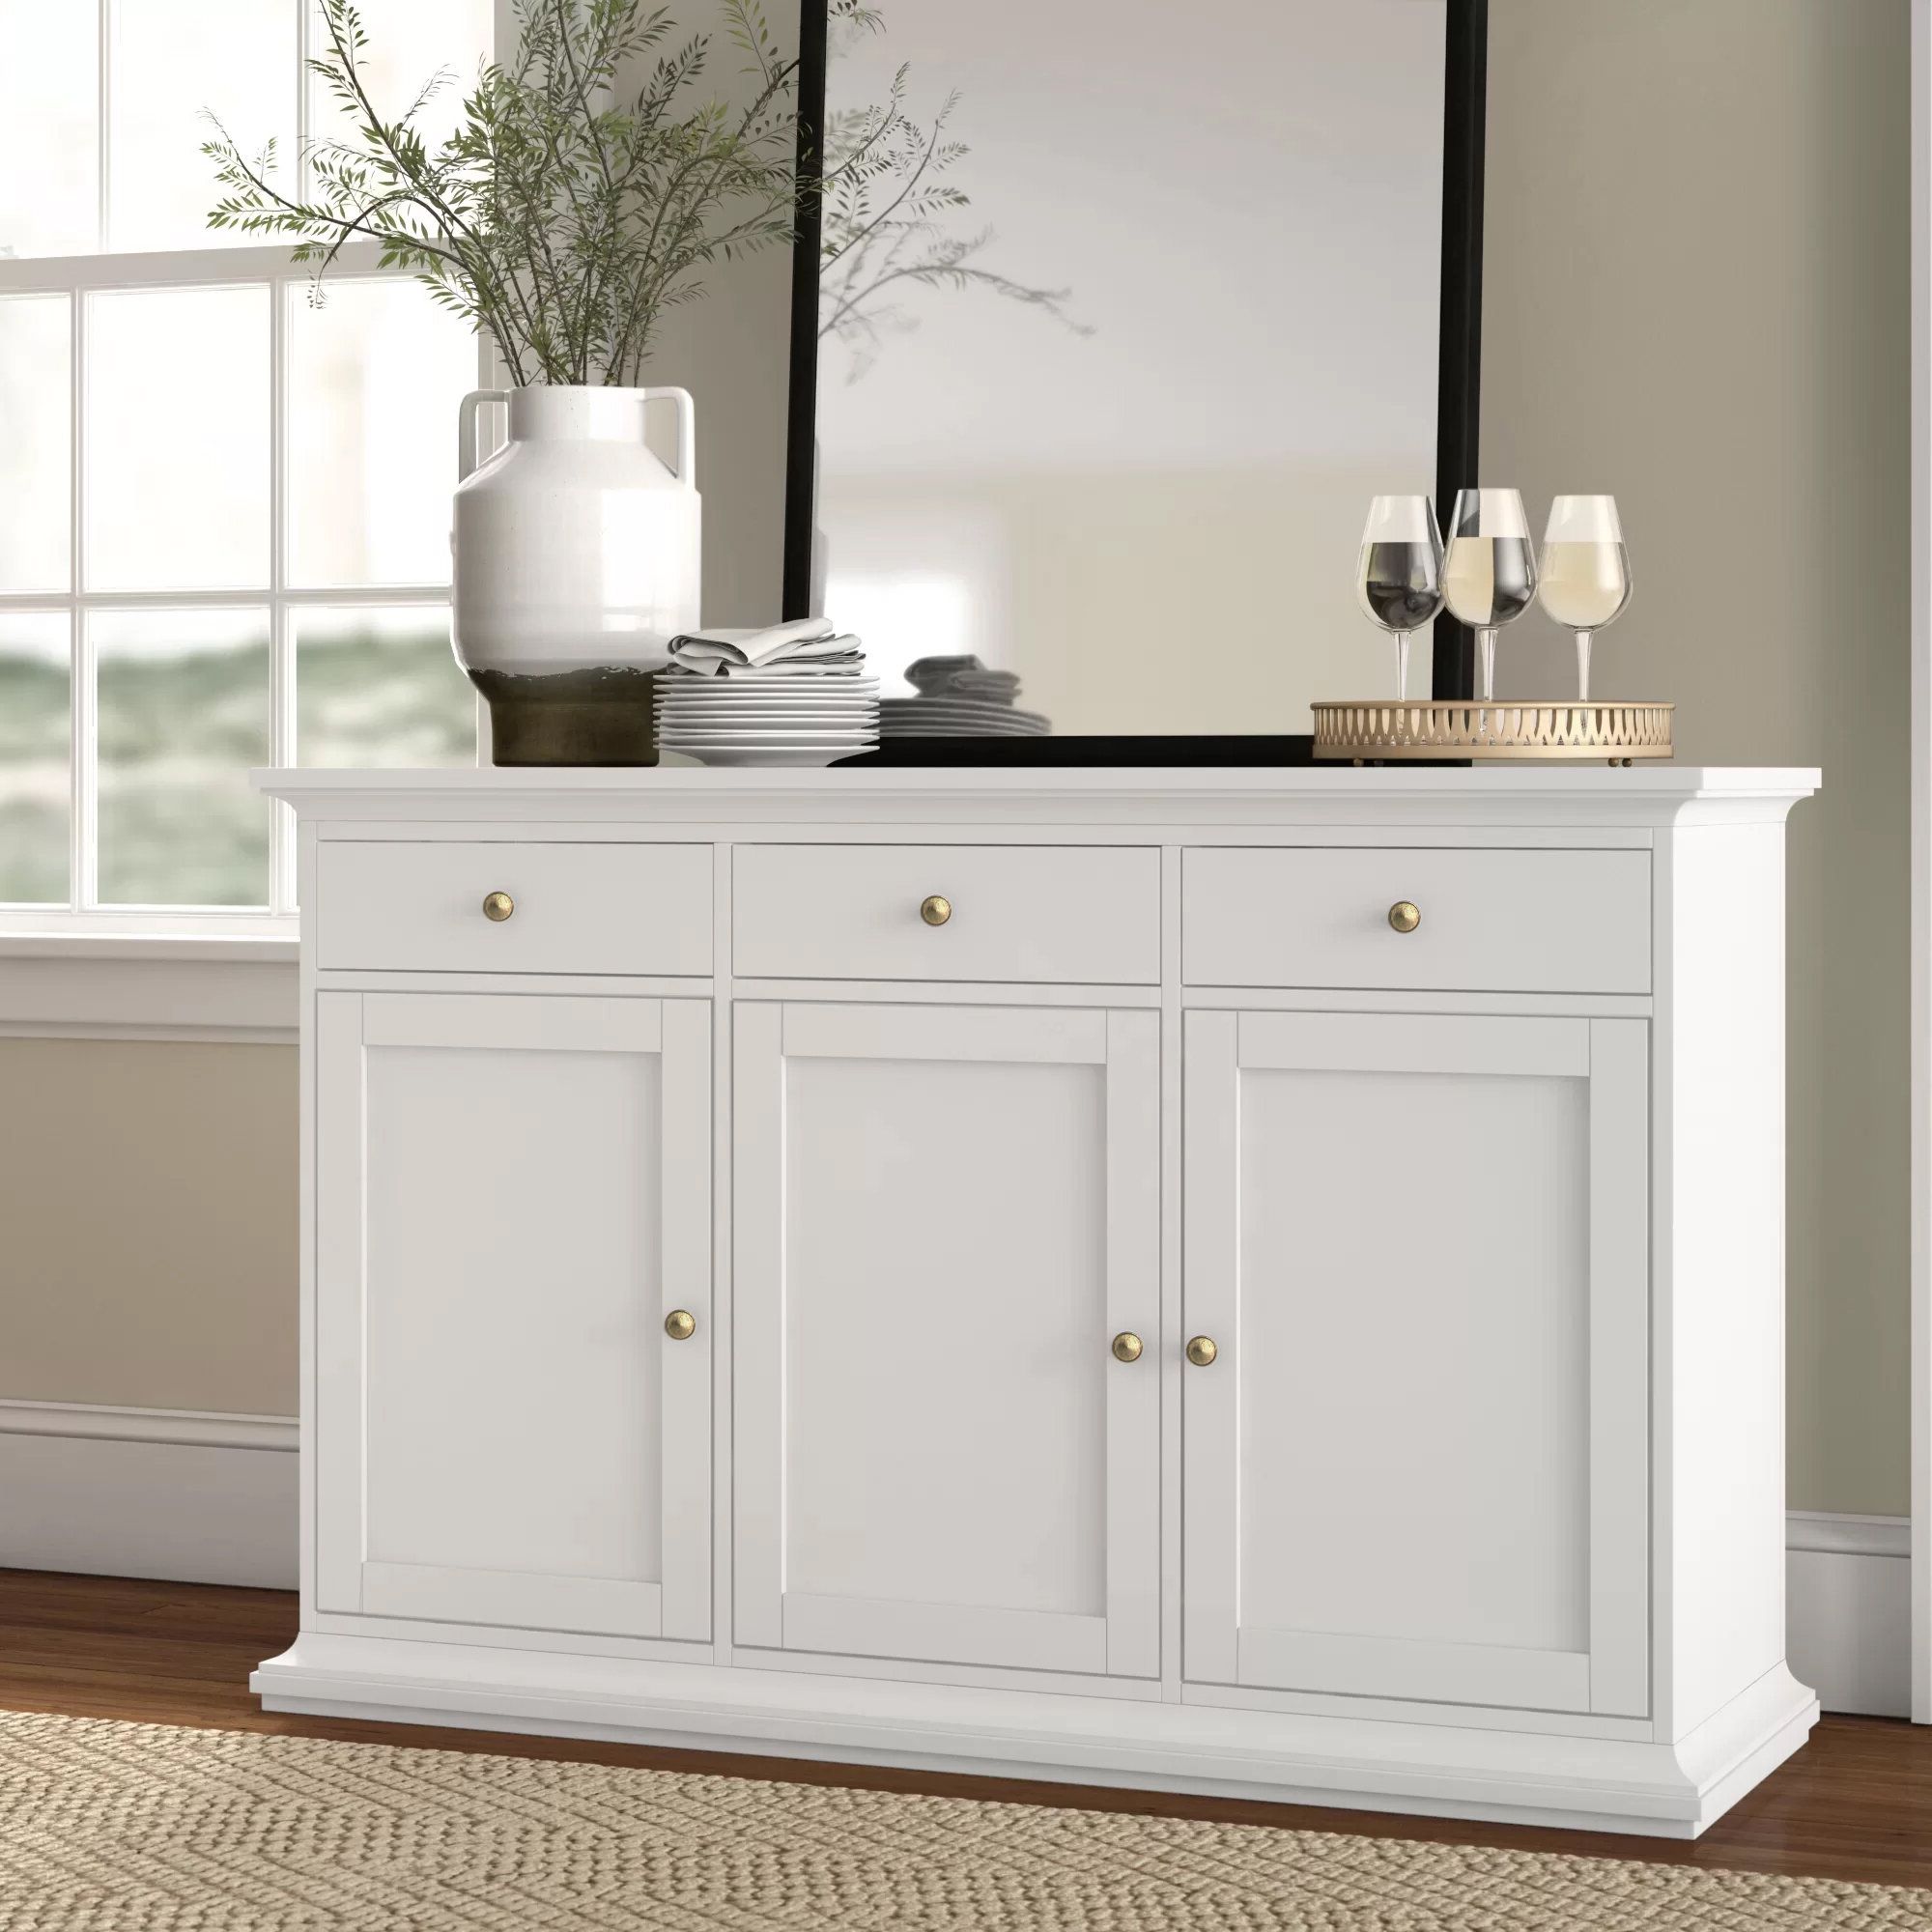 Three Posts™ Laux 56.57" Wide 3 Drawer Sideboard & Reviews | Wayfair Pertaining To 3 Drawer Sideboards (Gallery 1 of 20)